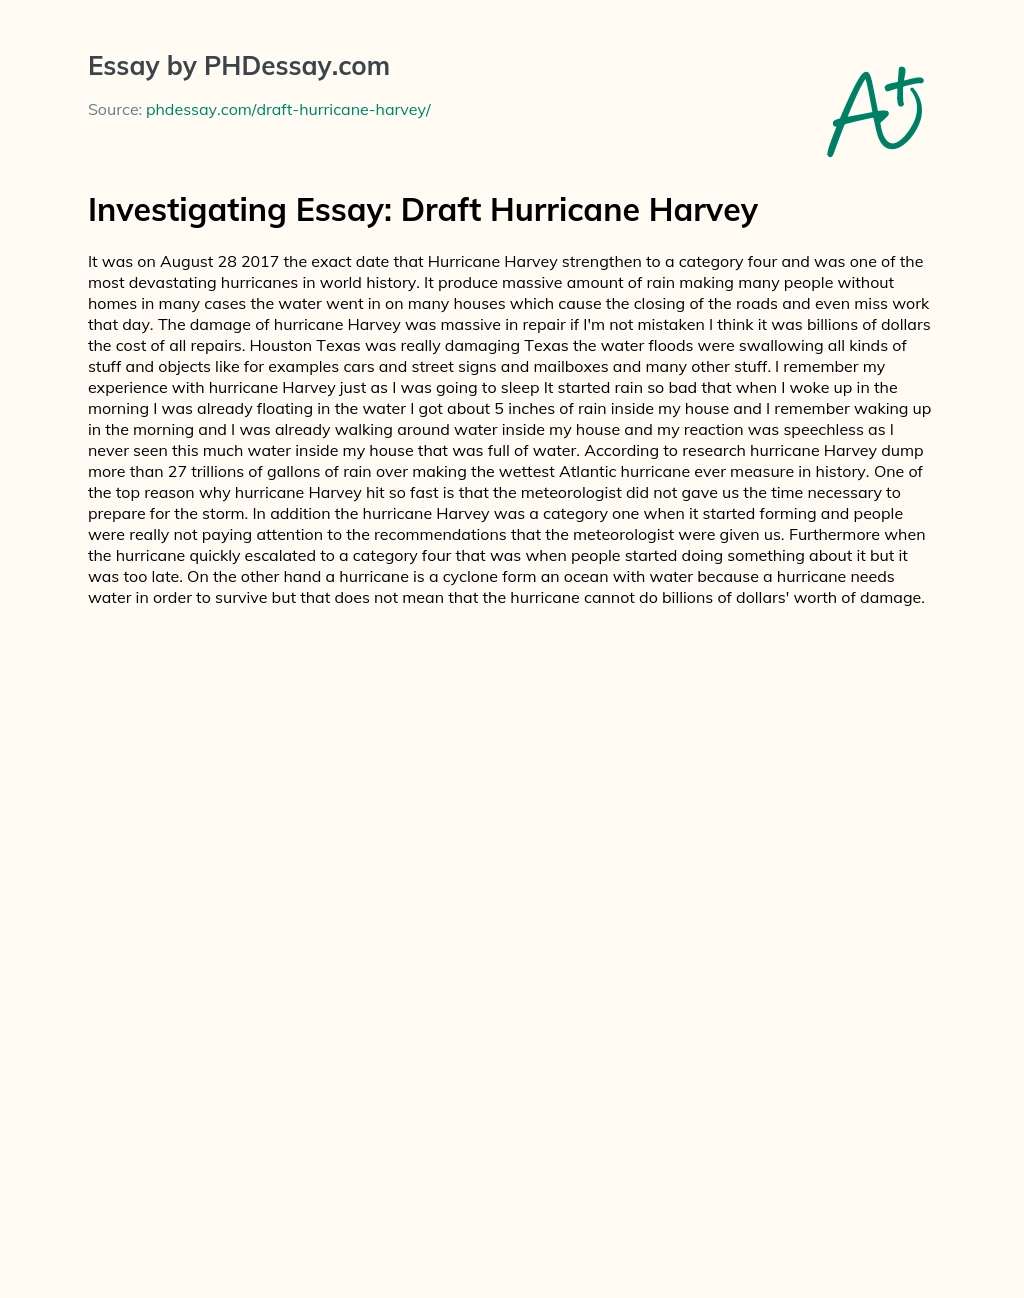 how to prepare for a natural disaster essay